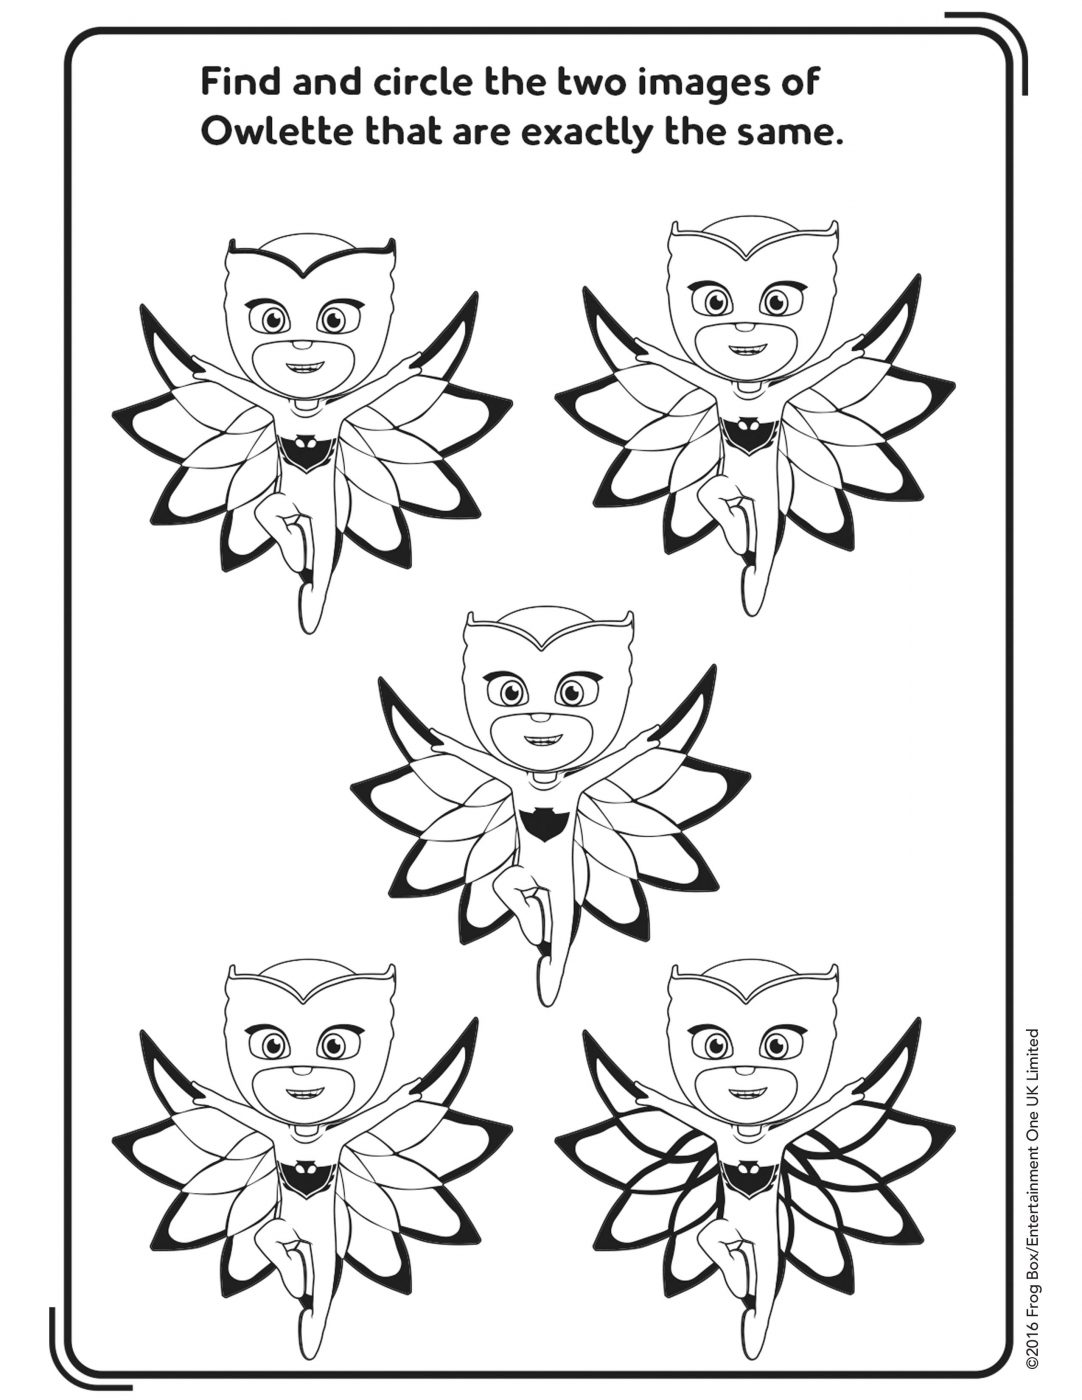 Circle the Two Images of Owlette